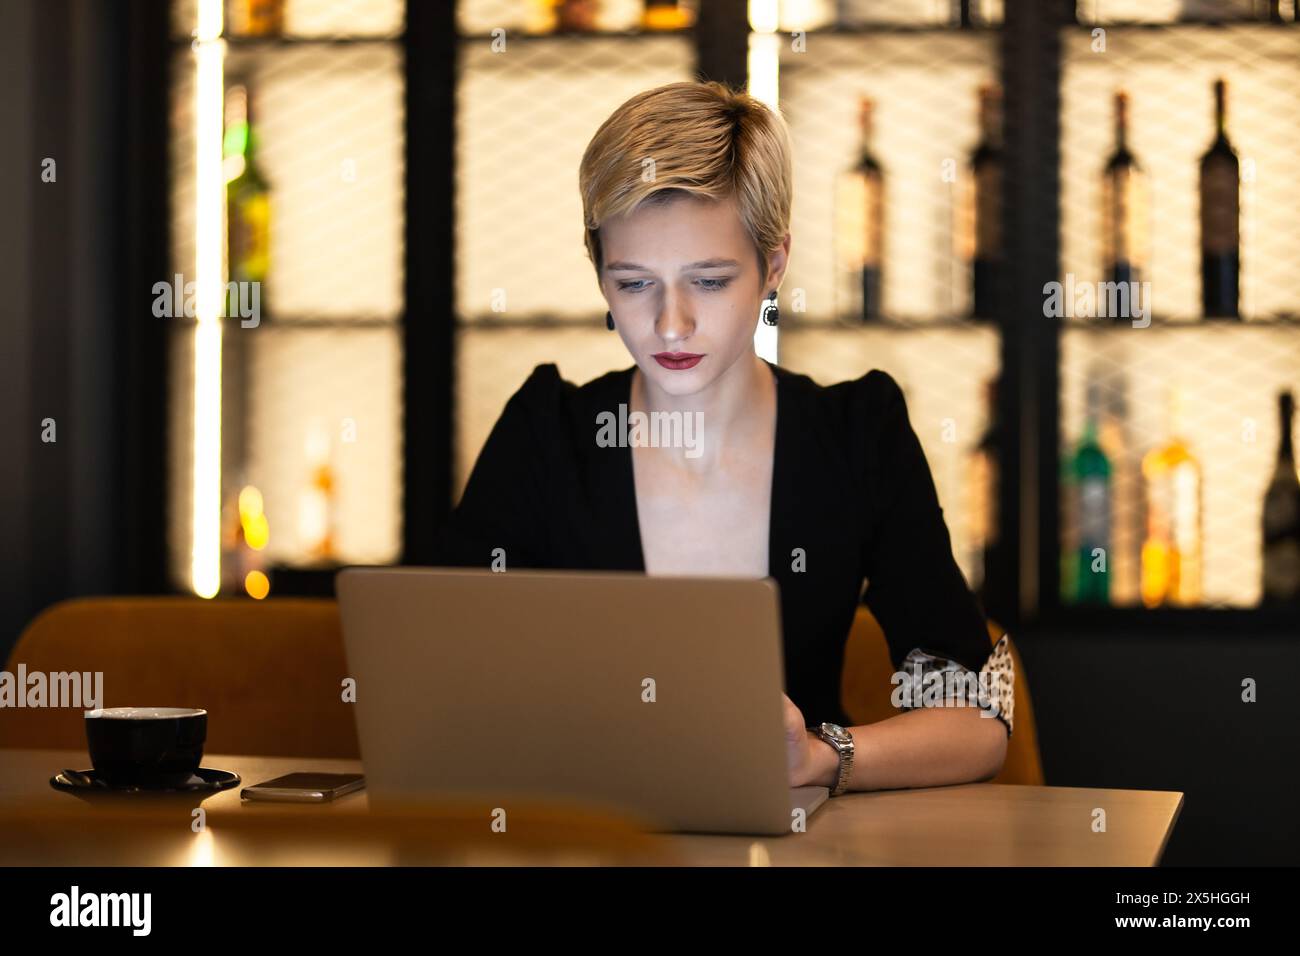 A professional young woman concentrates on her work on a laptop in a cozy café environment, displaying focus and determination. Stock Photo